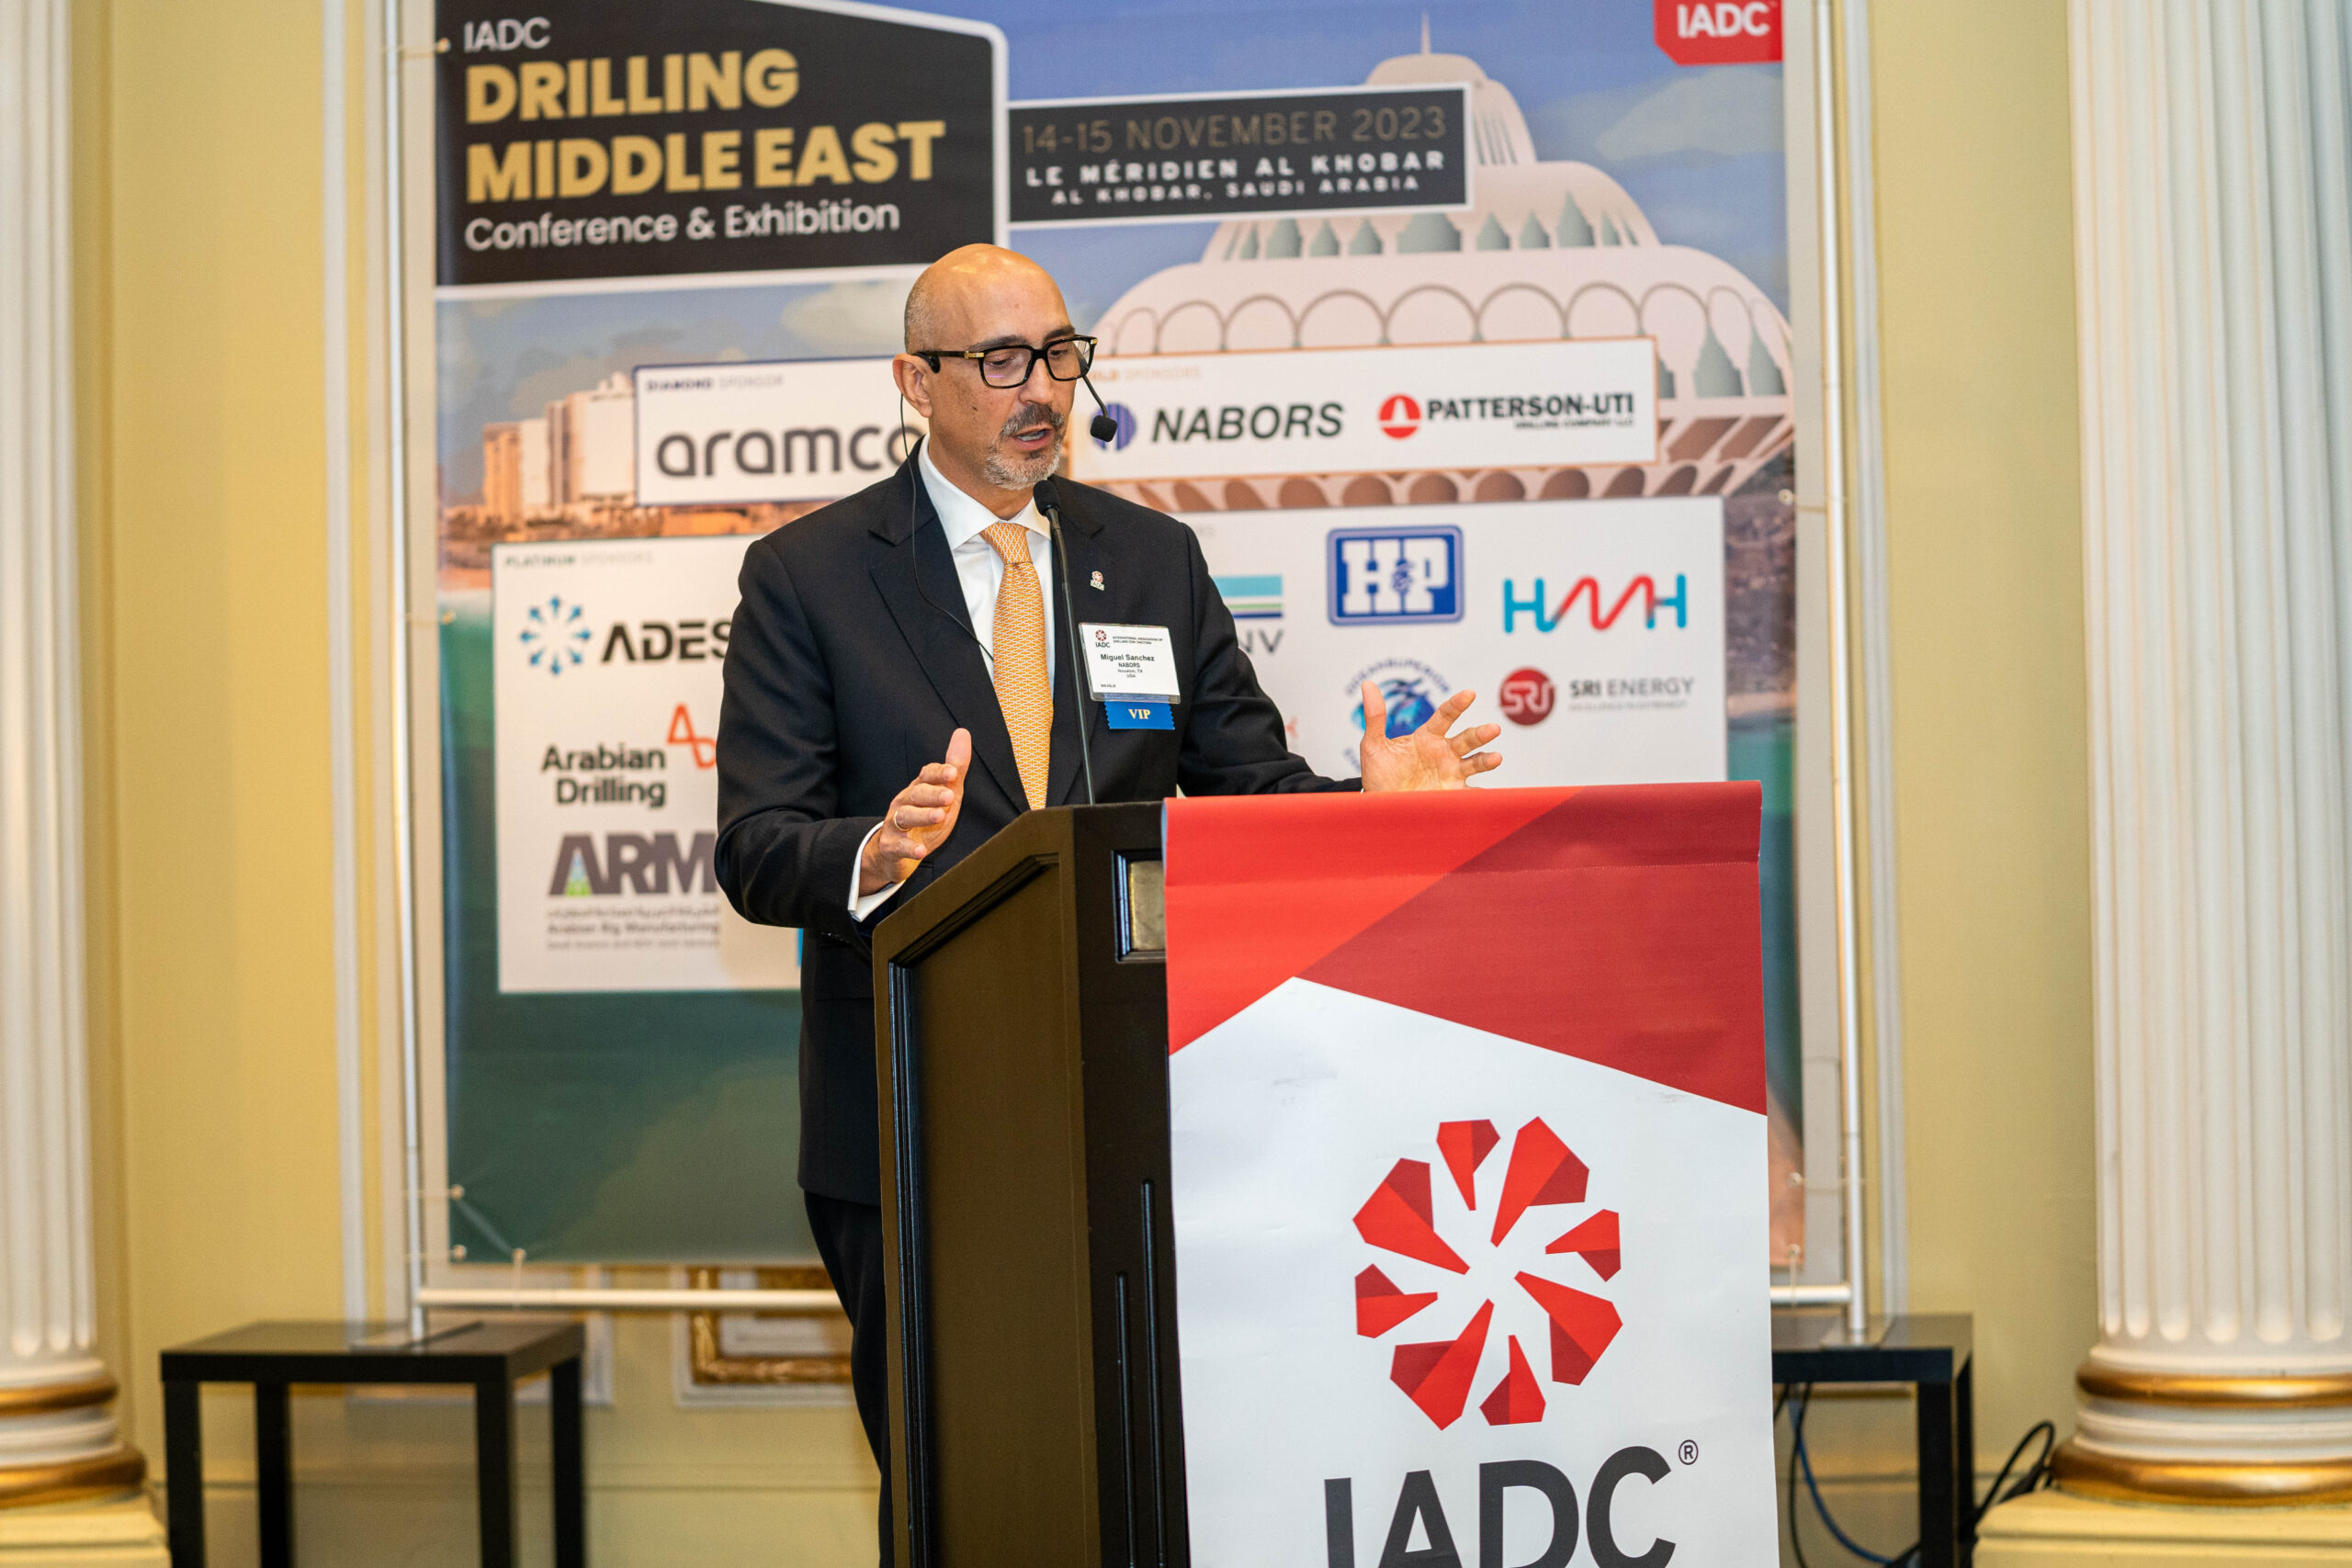 Miguel Sanchez speaks at the IADC Drilling Middle East 2023 Conference in Saudi Arabia